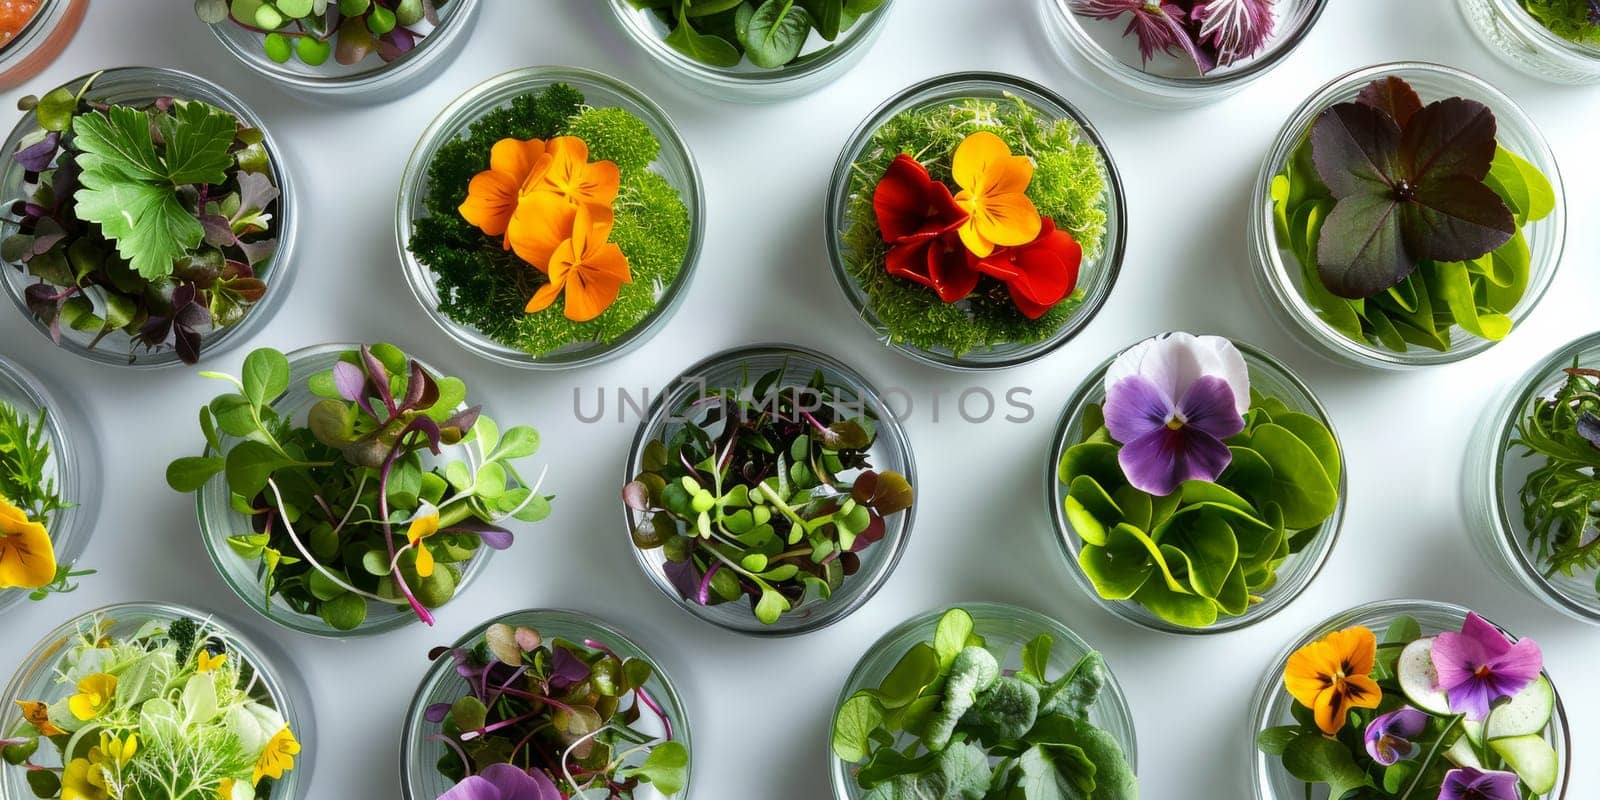 Garnishes and decorations used in gourmet cuisine, such as microgreens, edible flowers, or delicate herb leaves